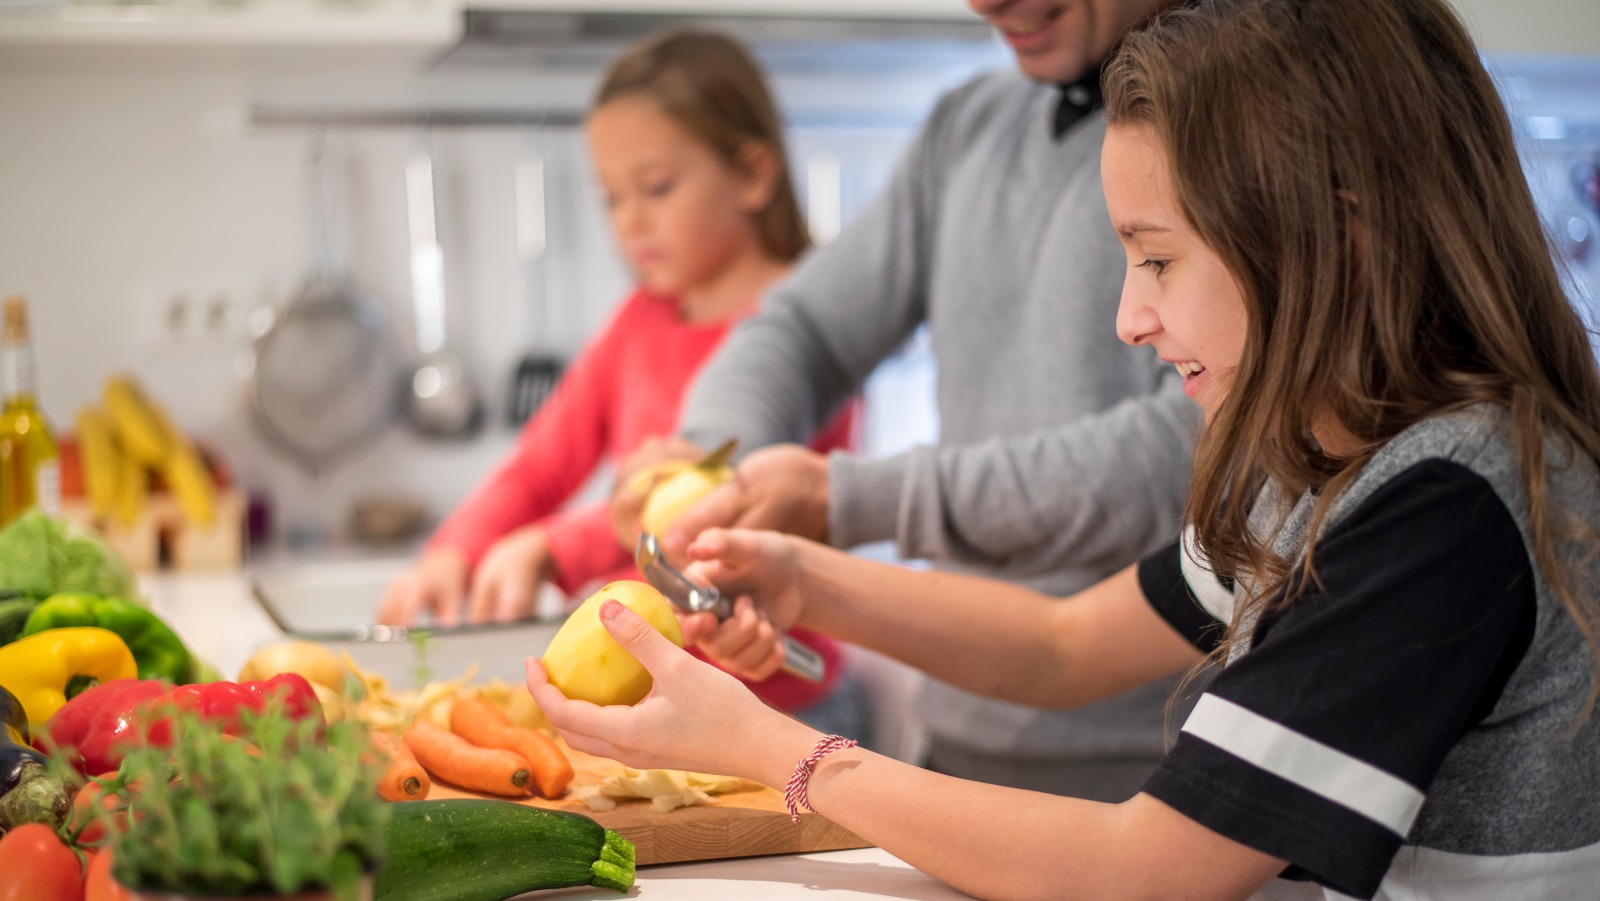 Gluten-free food guide puts good nutrition on the plate for kids